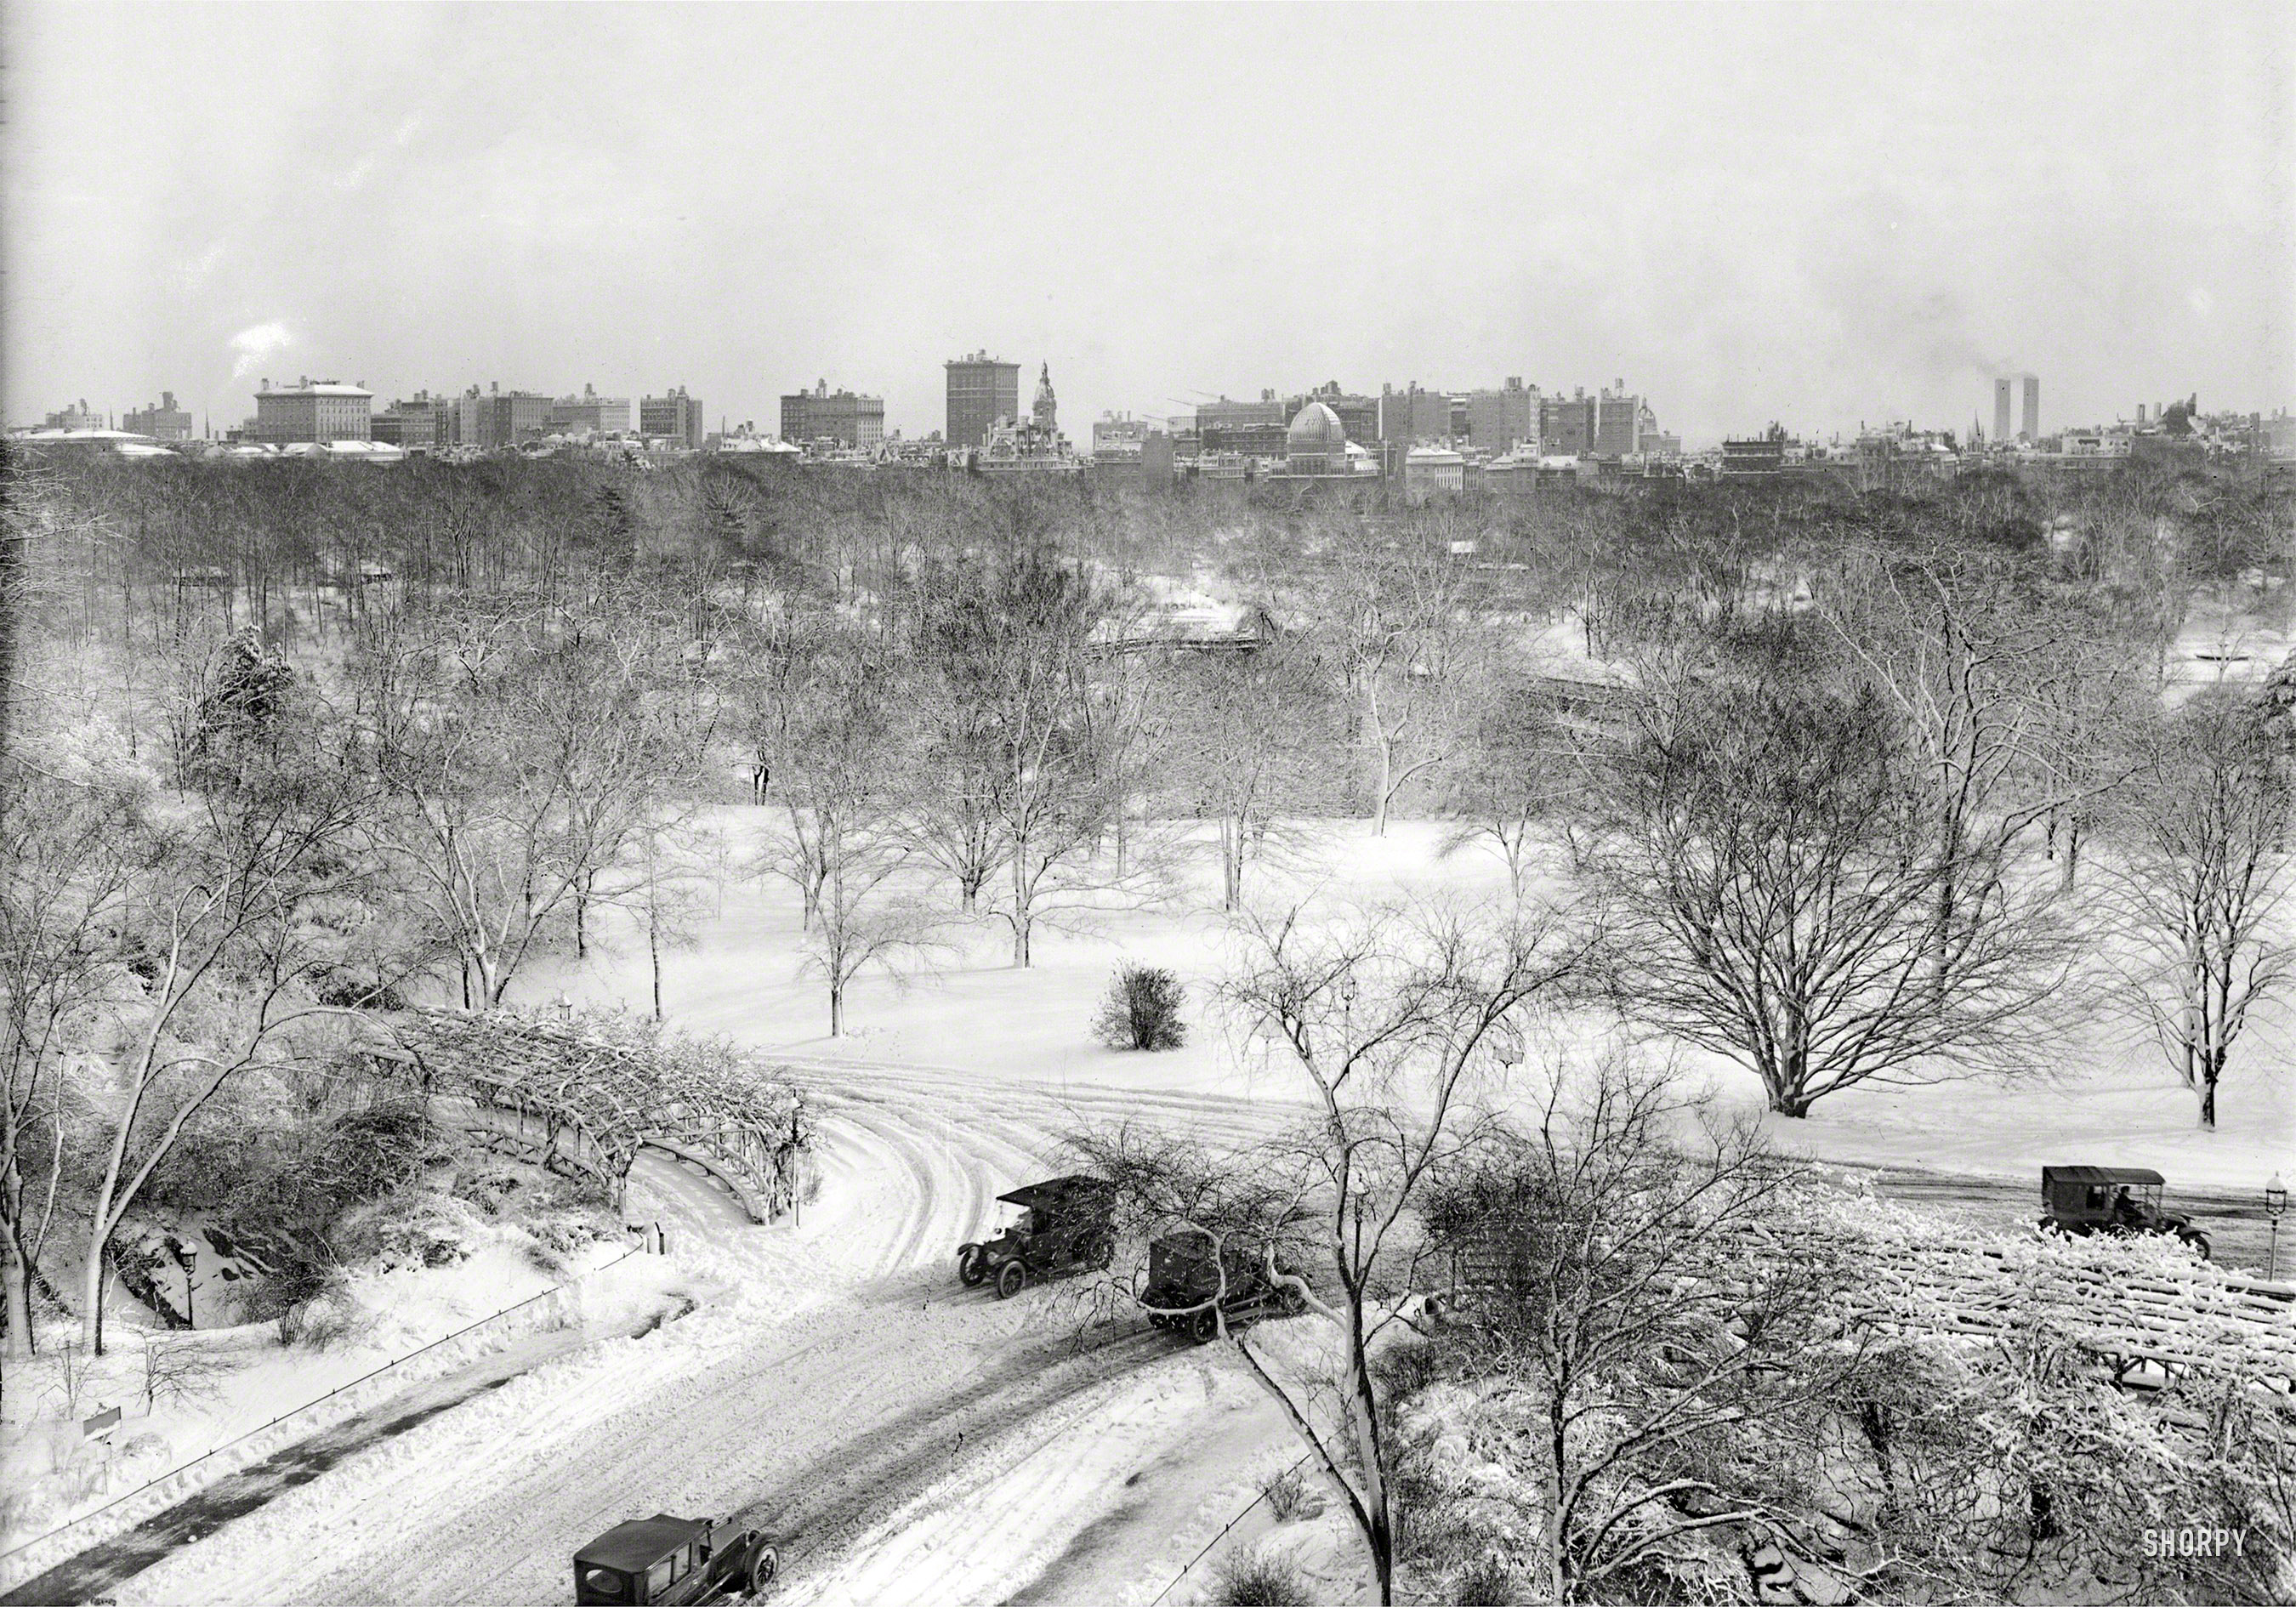 Dec. 14, 1915. "New York. Central Park at 72nd Street after blizzard." 5x7 glass negative, George Grantham Bain Collection. View full size.